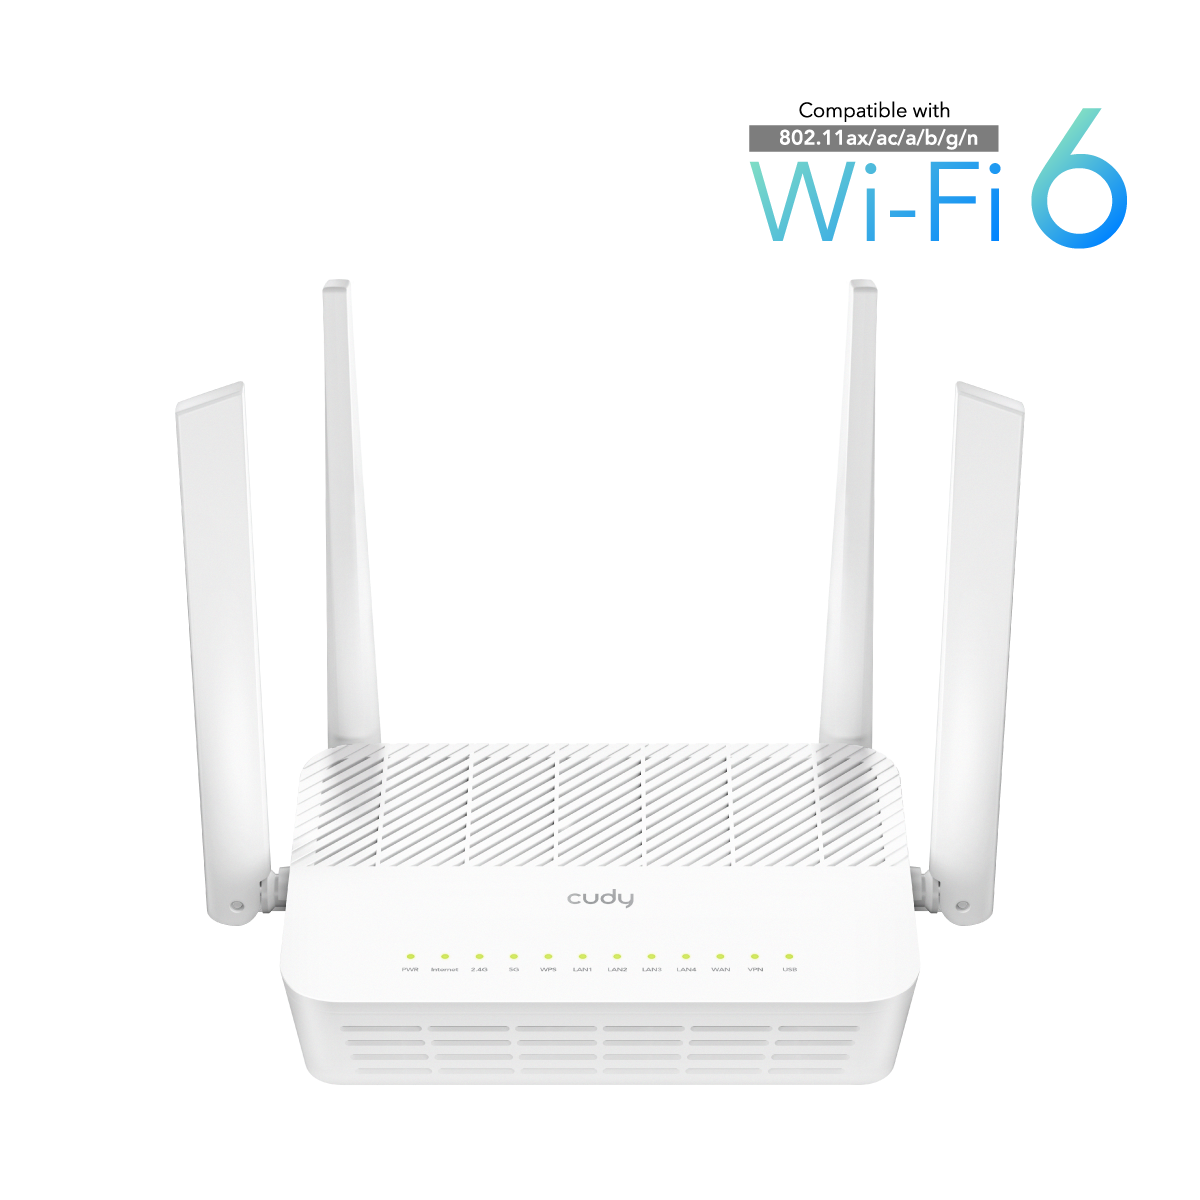 AX3000 Gigabit Wi-Fi 6 Mesh Router, Model: WR3000-Cudy: WiFi, 4G, and 5G  Equipments and Solutions